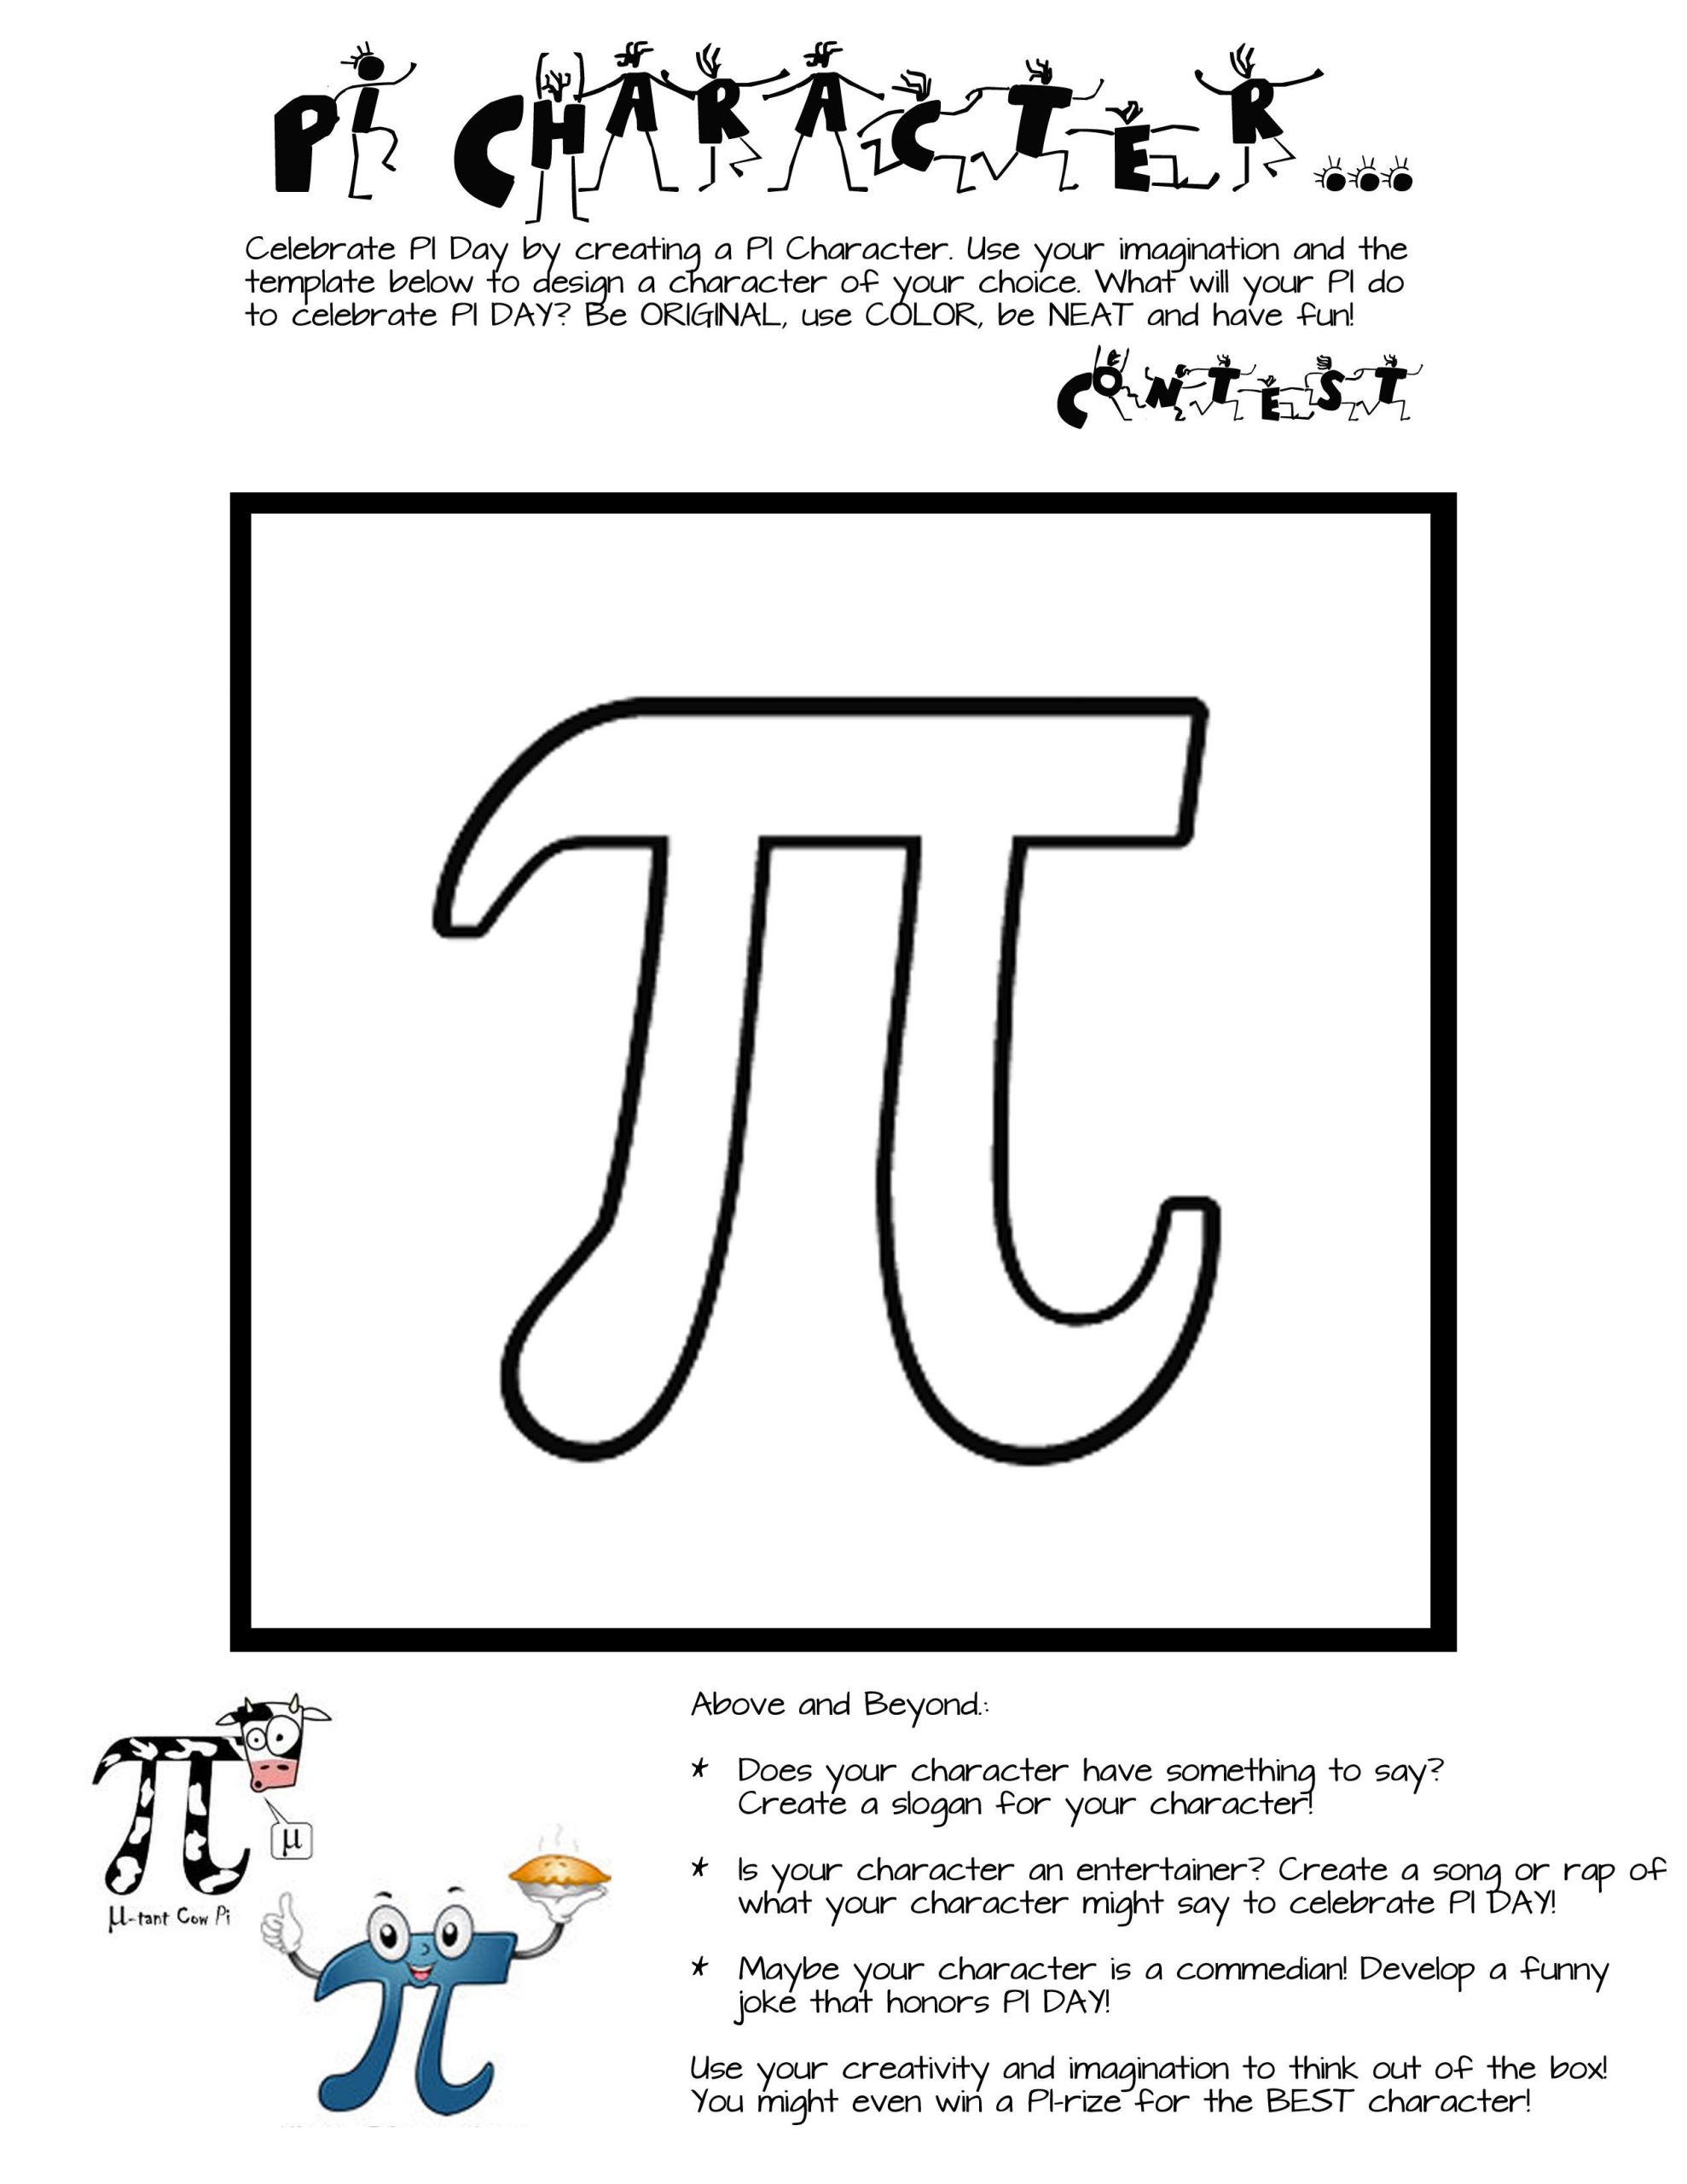 Pi Day Activities 2012
 This is the PI Day Activity that I created for my middle